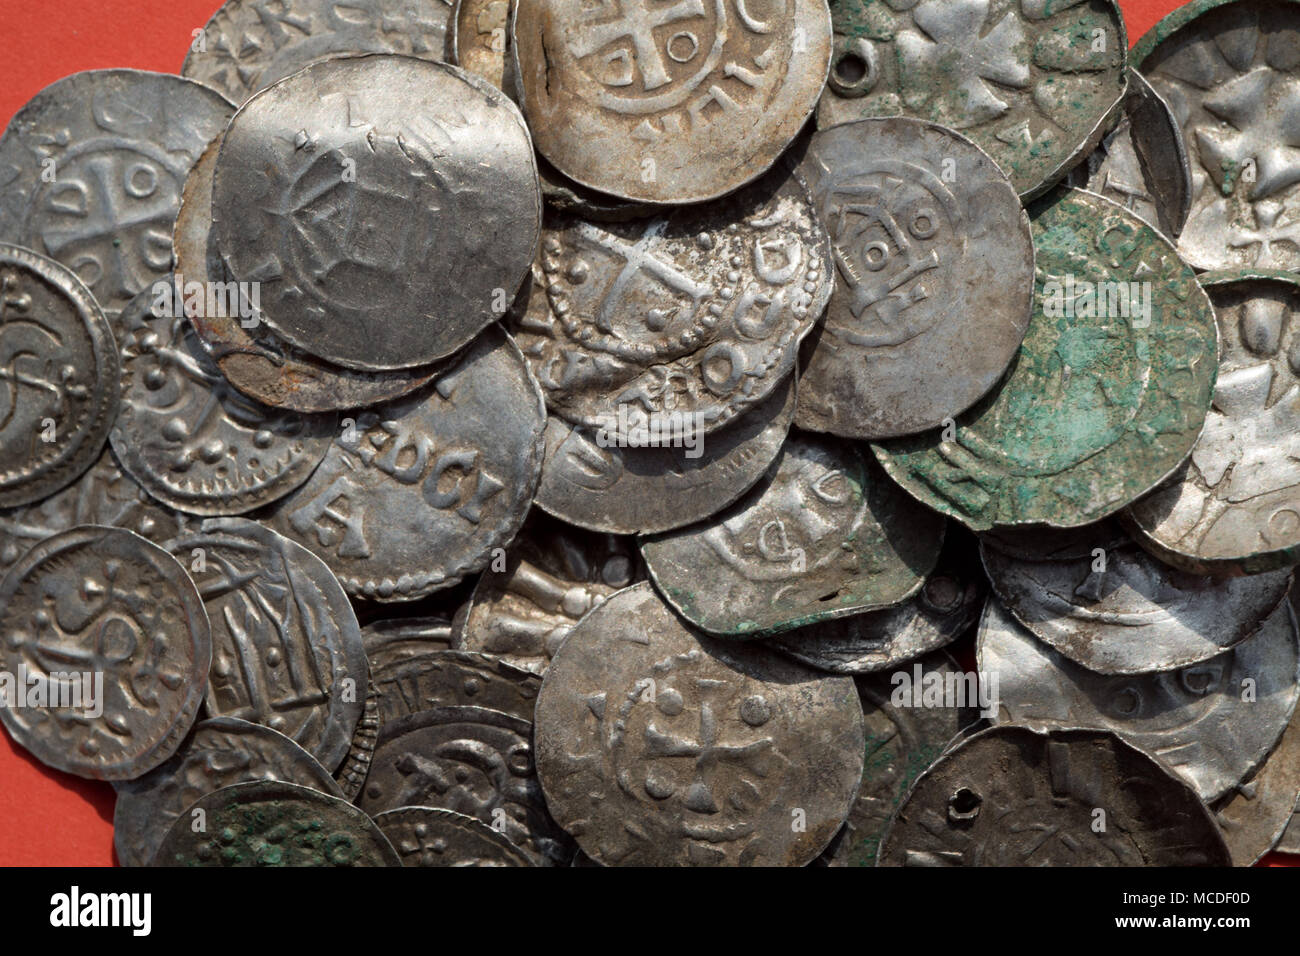 Te voet vijandigheid Optimaal 13 April 2018, Germany, Schaprode: An assortment of Saxon, Ottonian, Danish  and Byzantine coins, some of which were apparently used as pendants  (perforated with a hole) on a table. Archaeologists have discovered